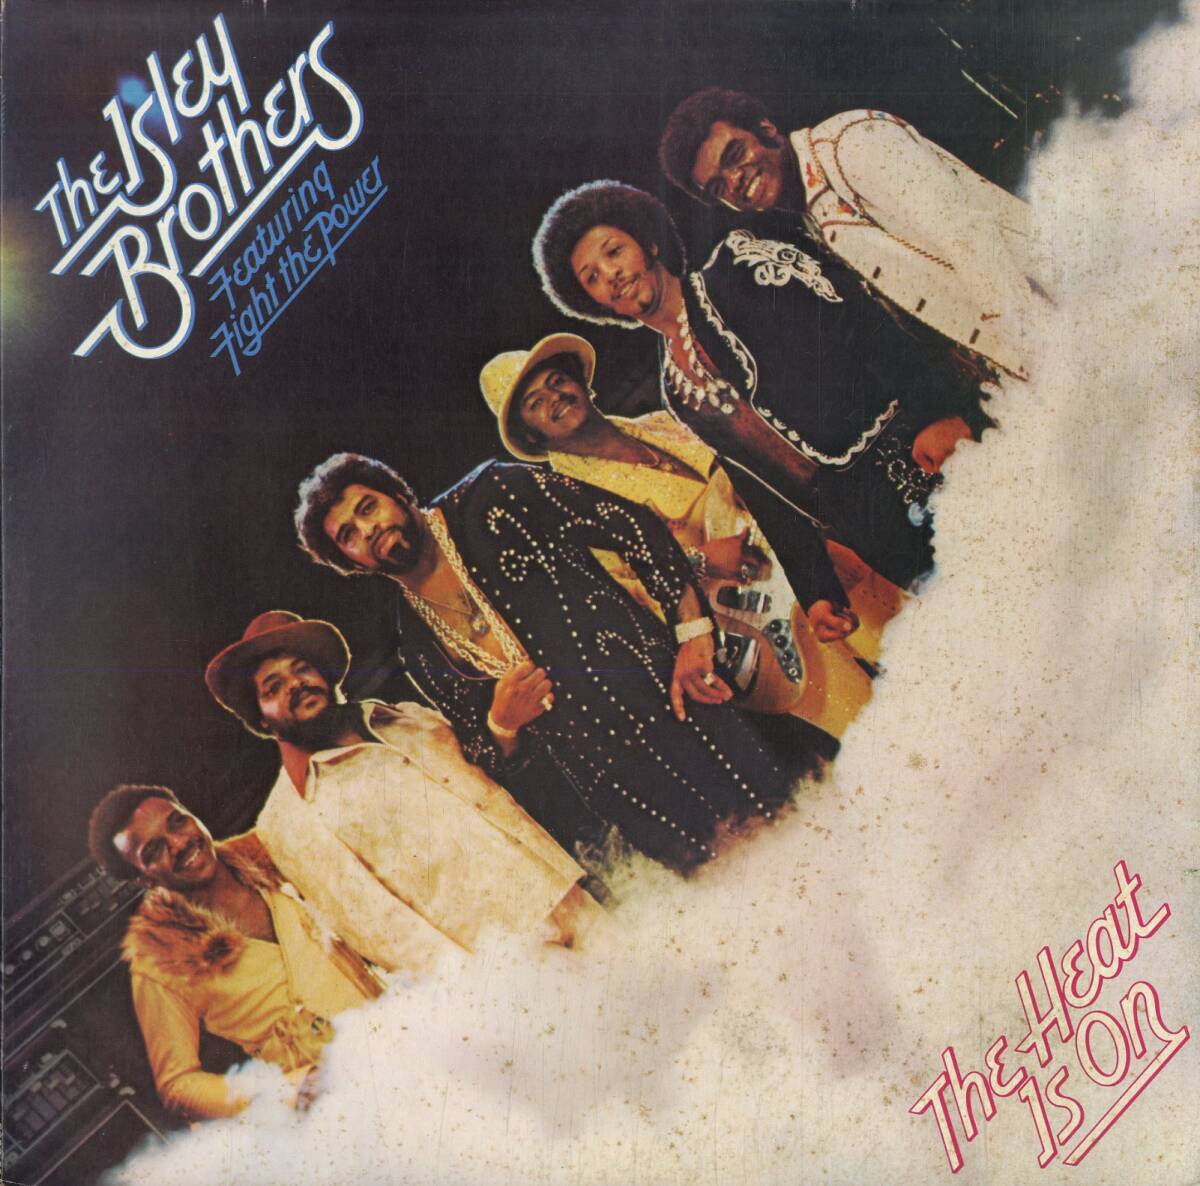 A00589230/LP/アイズレー・ブラザーズ (THE ISLEY BROTHERS)「The Heat Is On Featuring: Fight The Power (1975年・ECPO-55・ソウル・SO_画像1